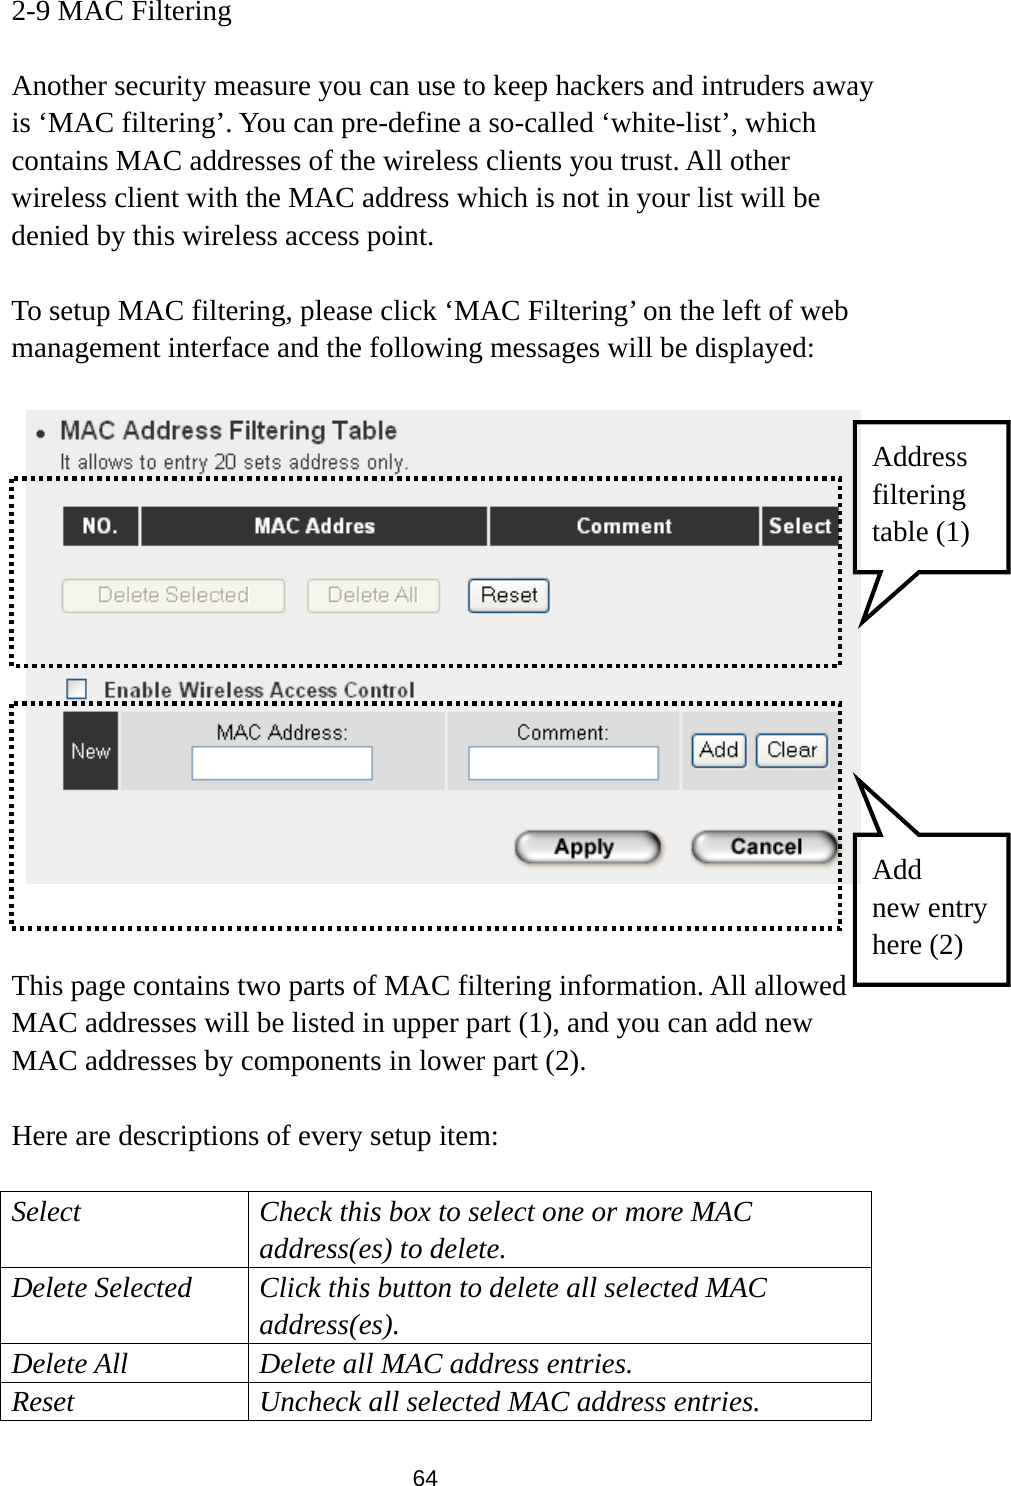 64 2-9 MAC Filtering  Another security measure you can use to keep hackers and intruders away is ‘MAC filtering’. You can pre-define a so-called ‘white-list’, which contains MAC addresses of the wireless clients you trust. All other wireless client with the MAC address which is not in your list will be denied by this wireless access point.  To setup MAC filtering, please click ‘MAC Filtering’ on the left of web management interface and the following messages will be displayed:      This page contains two parts of MAC filtering information. All allowed MAC addresses will be listed in upper part (1), and you can add new MAC addresses by components in lower part (2).  Here are descriptions of every setup item:  Select Check this box to select one or more MAC address(es) to delete. Delete Selected Click this button to delete all selected MAC address(es). Delete All Delete all MAC address entries. Reset Uncheck all selected MAC address entries. Address filtering  table (1) Add  new entryhere (2) 